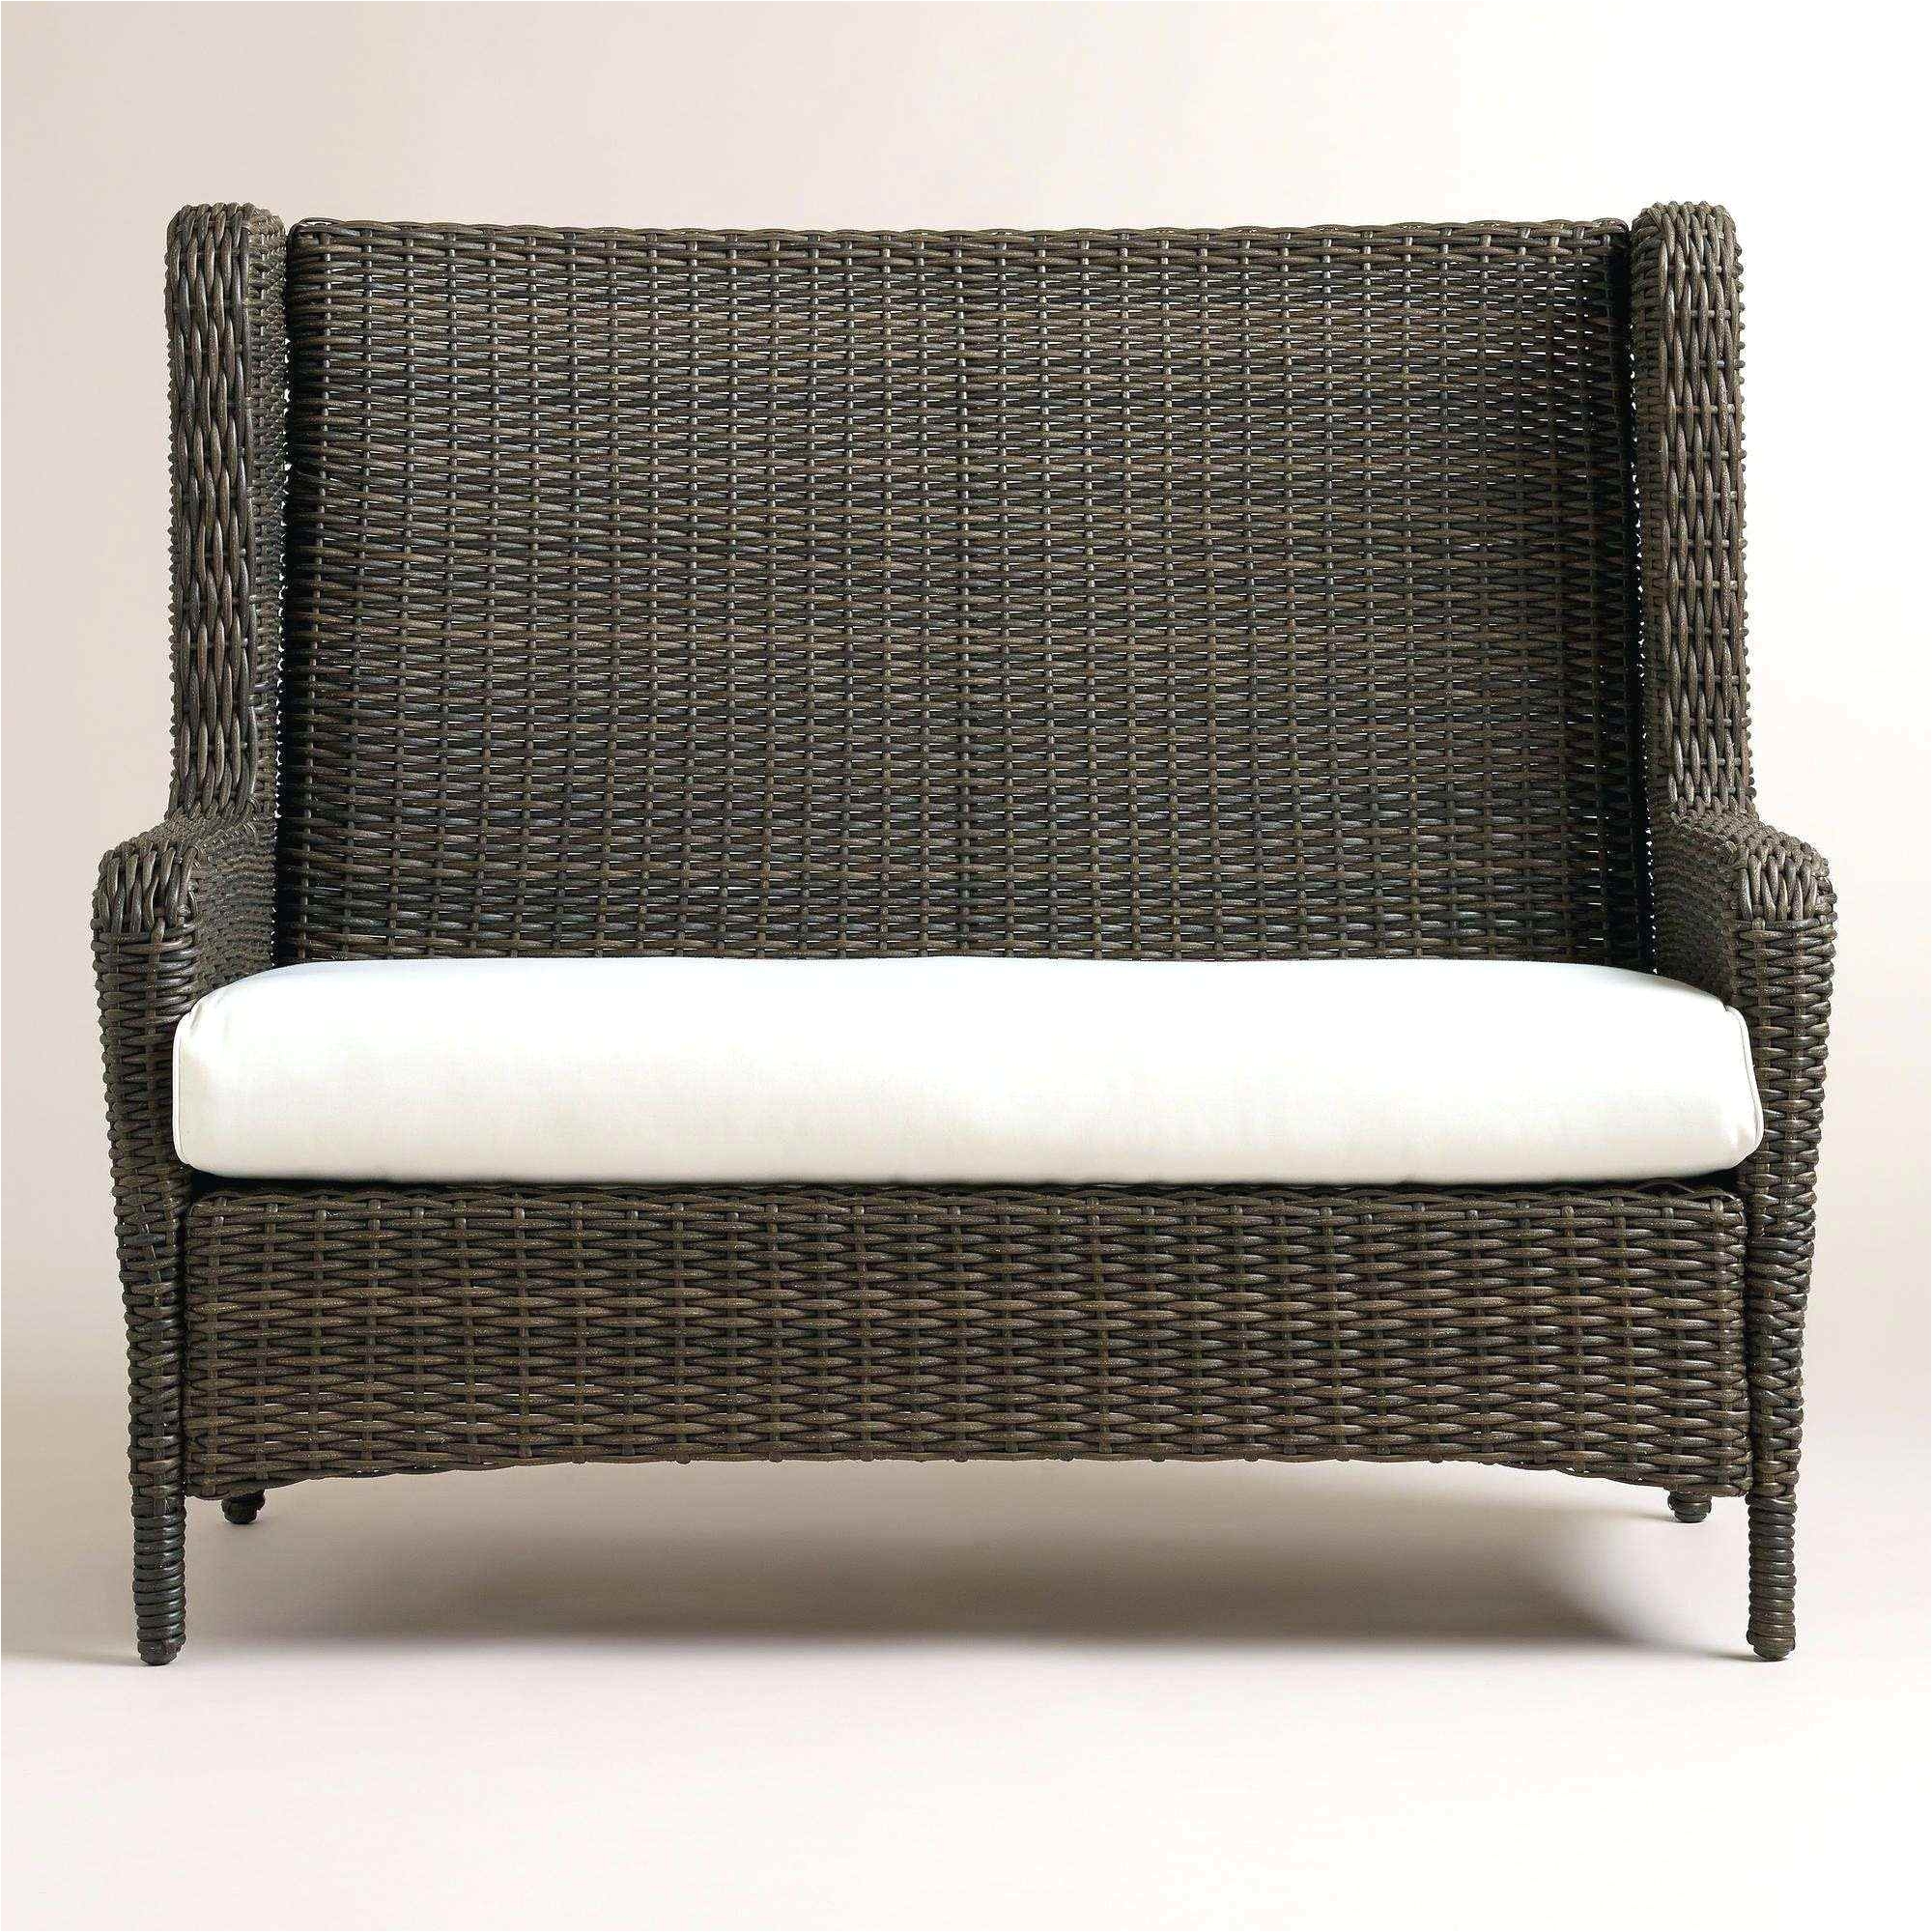 deck or patio elegant patio cover ideas nice wicker outdoor sofa 0d patio chairs sale